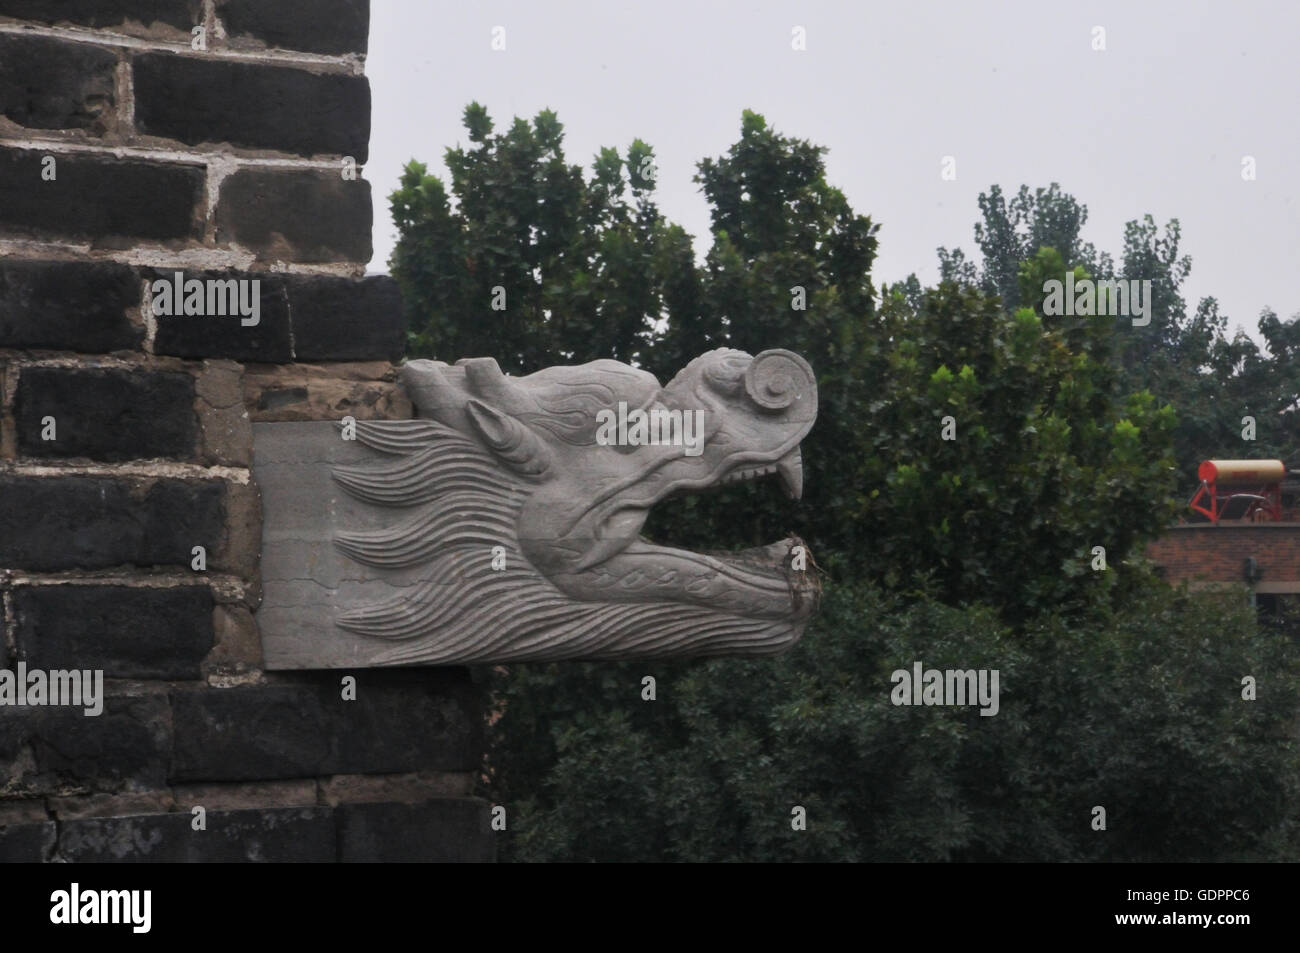 Guardian Lian Statuette on the Wall at Longting Park, Kaifeng, Henan, China Stock Photo